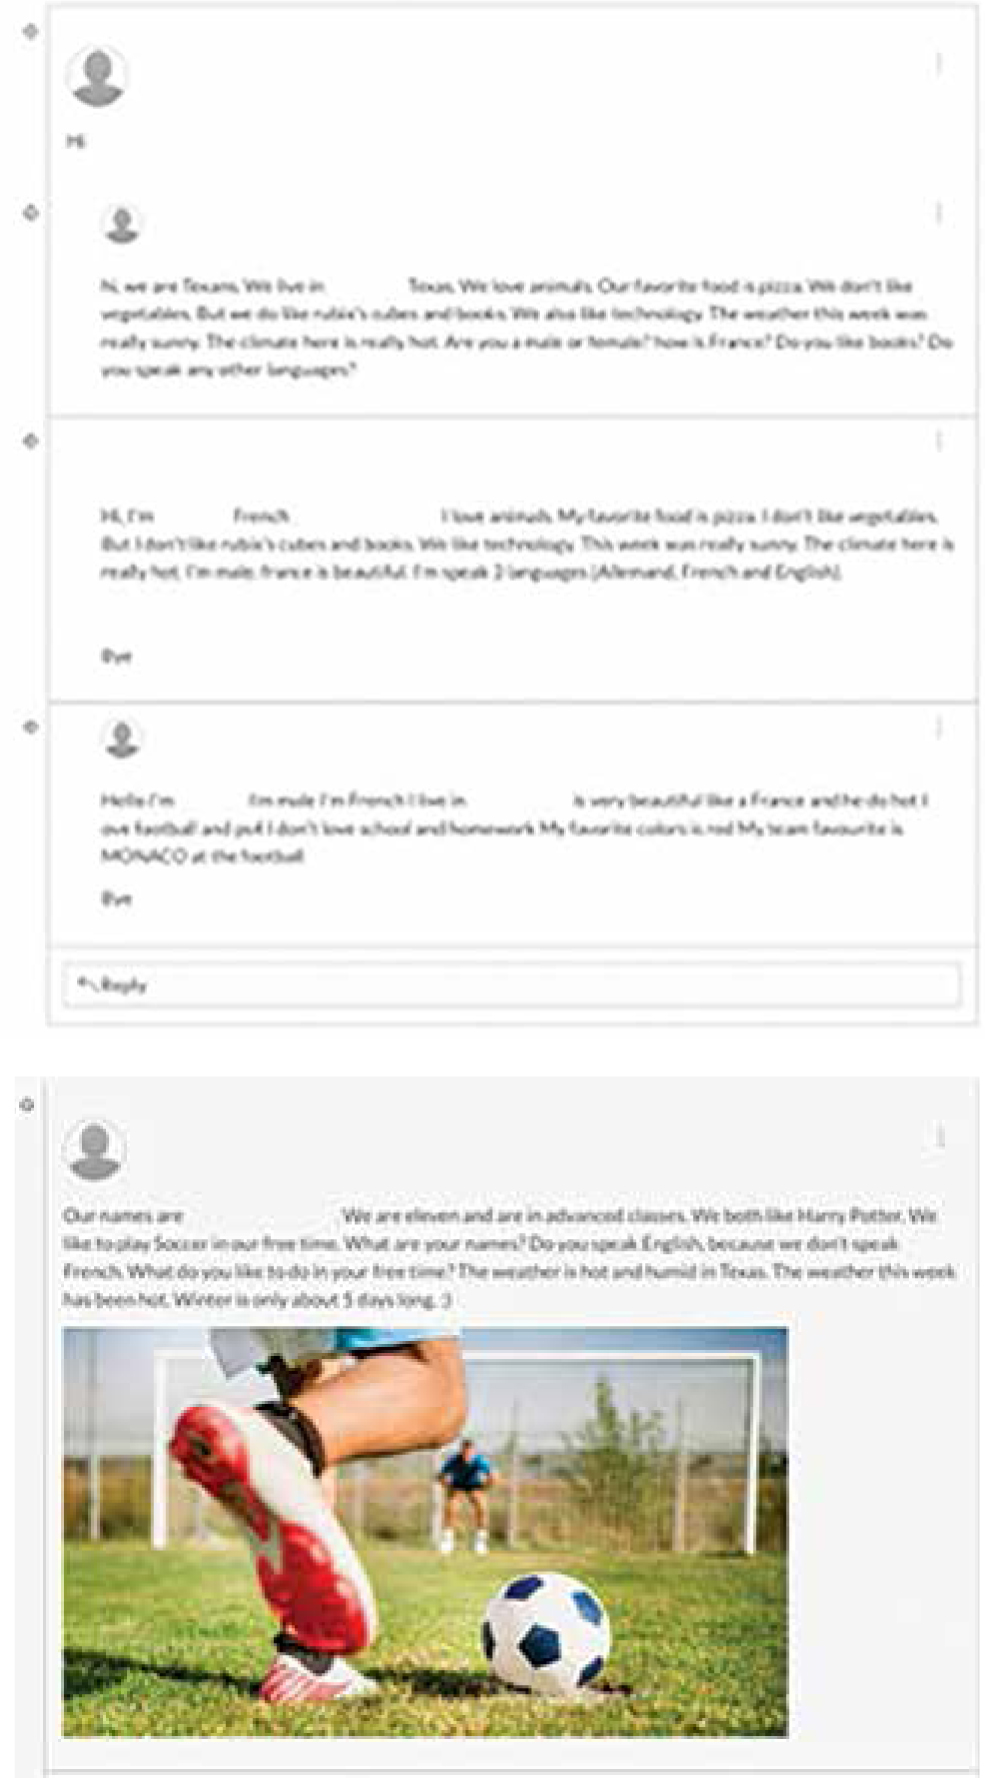 Example of a student discussion board using the platform Canvas.